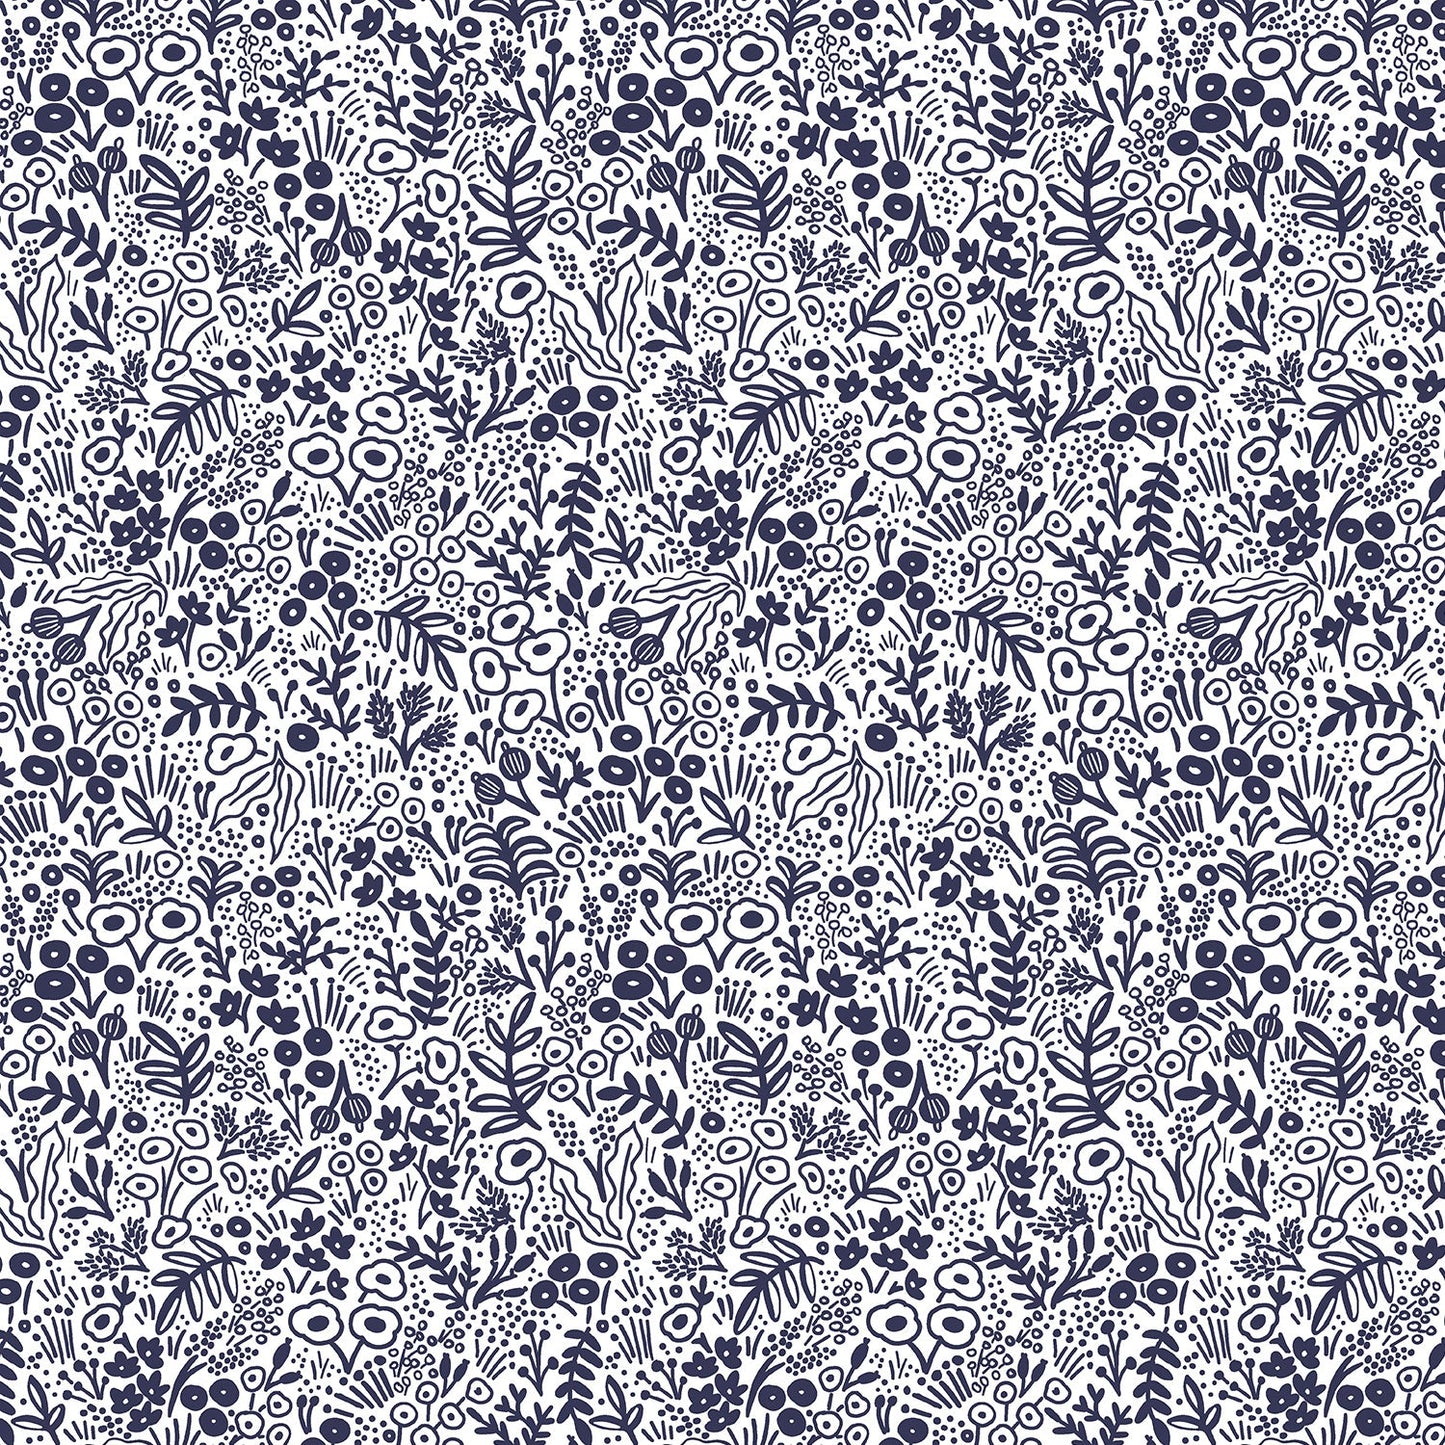 Tapestry Lace in Navy - Weave & Woven